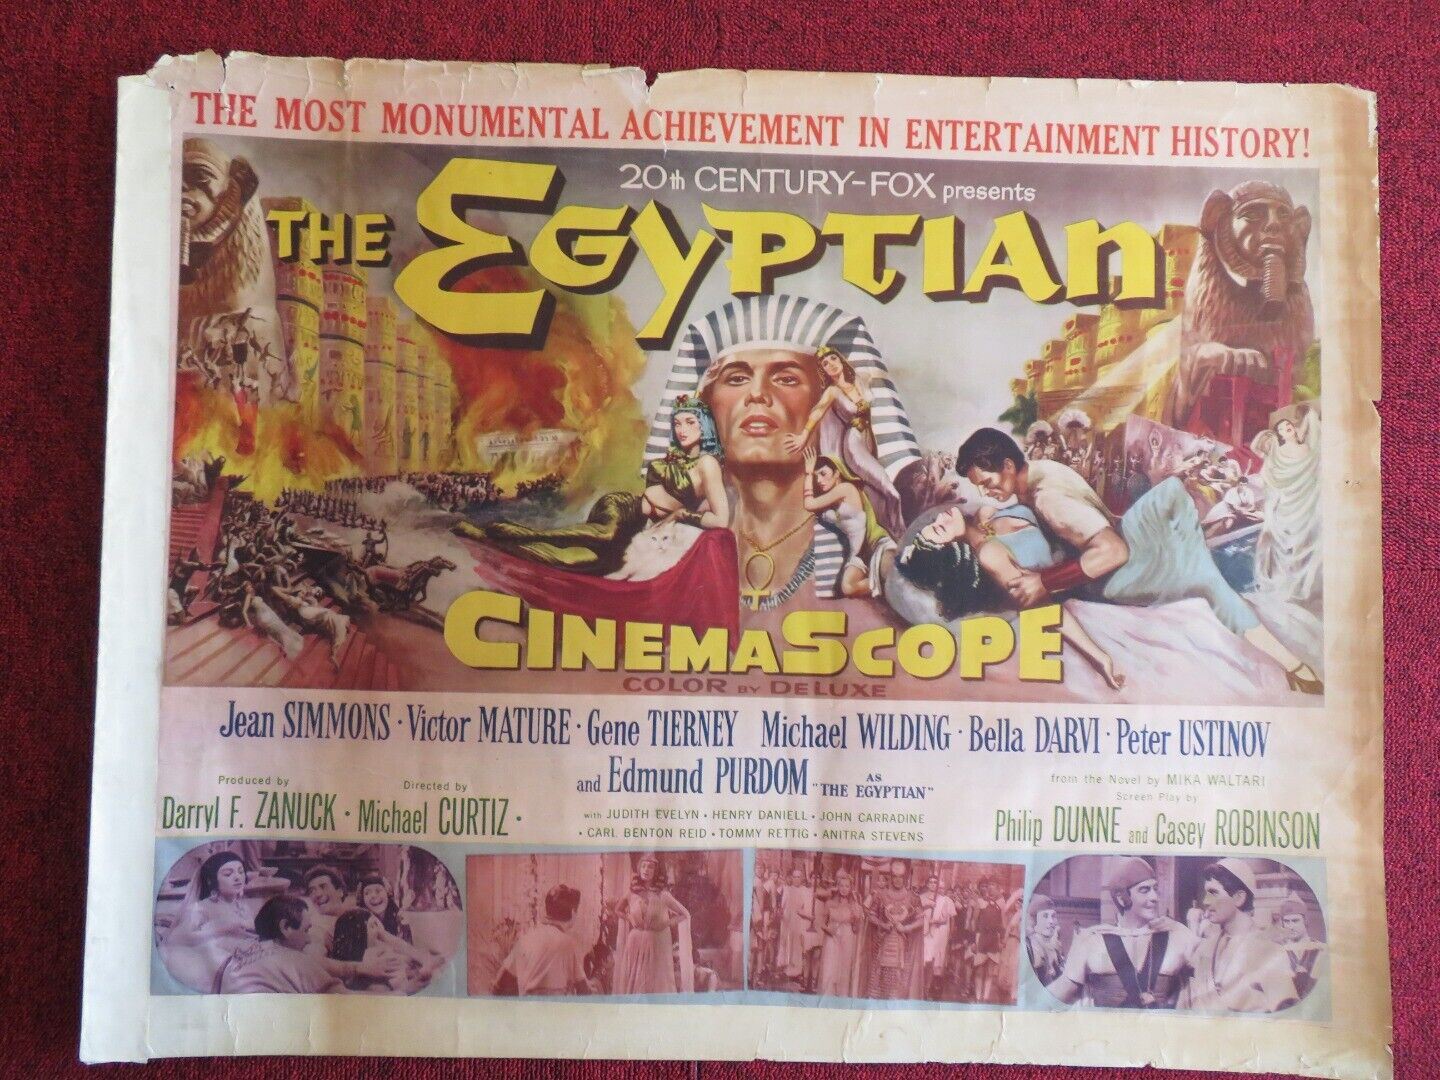 THE EGYTIAN   US HALF SHEET (22"x 28")  POSTER JEAN SIMMONS VICTOR MATURE 1954